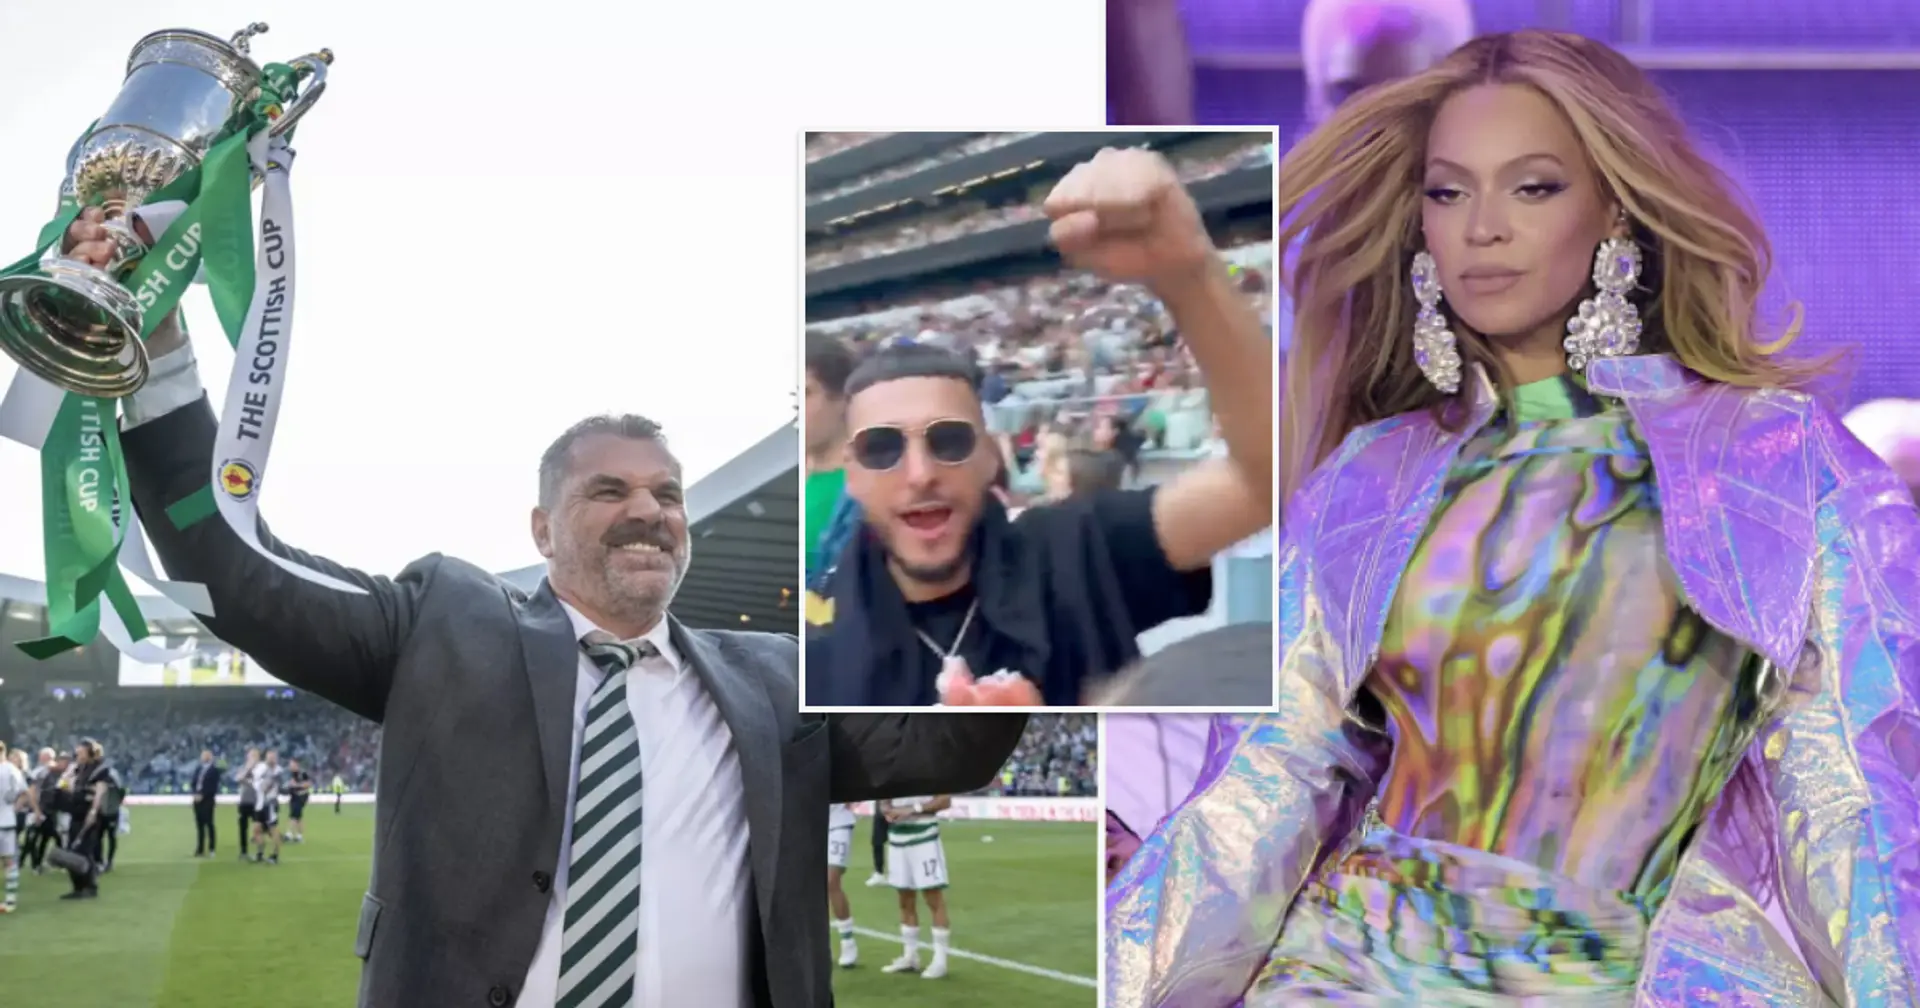 Spurs fans chant about new head coach at Beyonce gig - they even got his name right